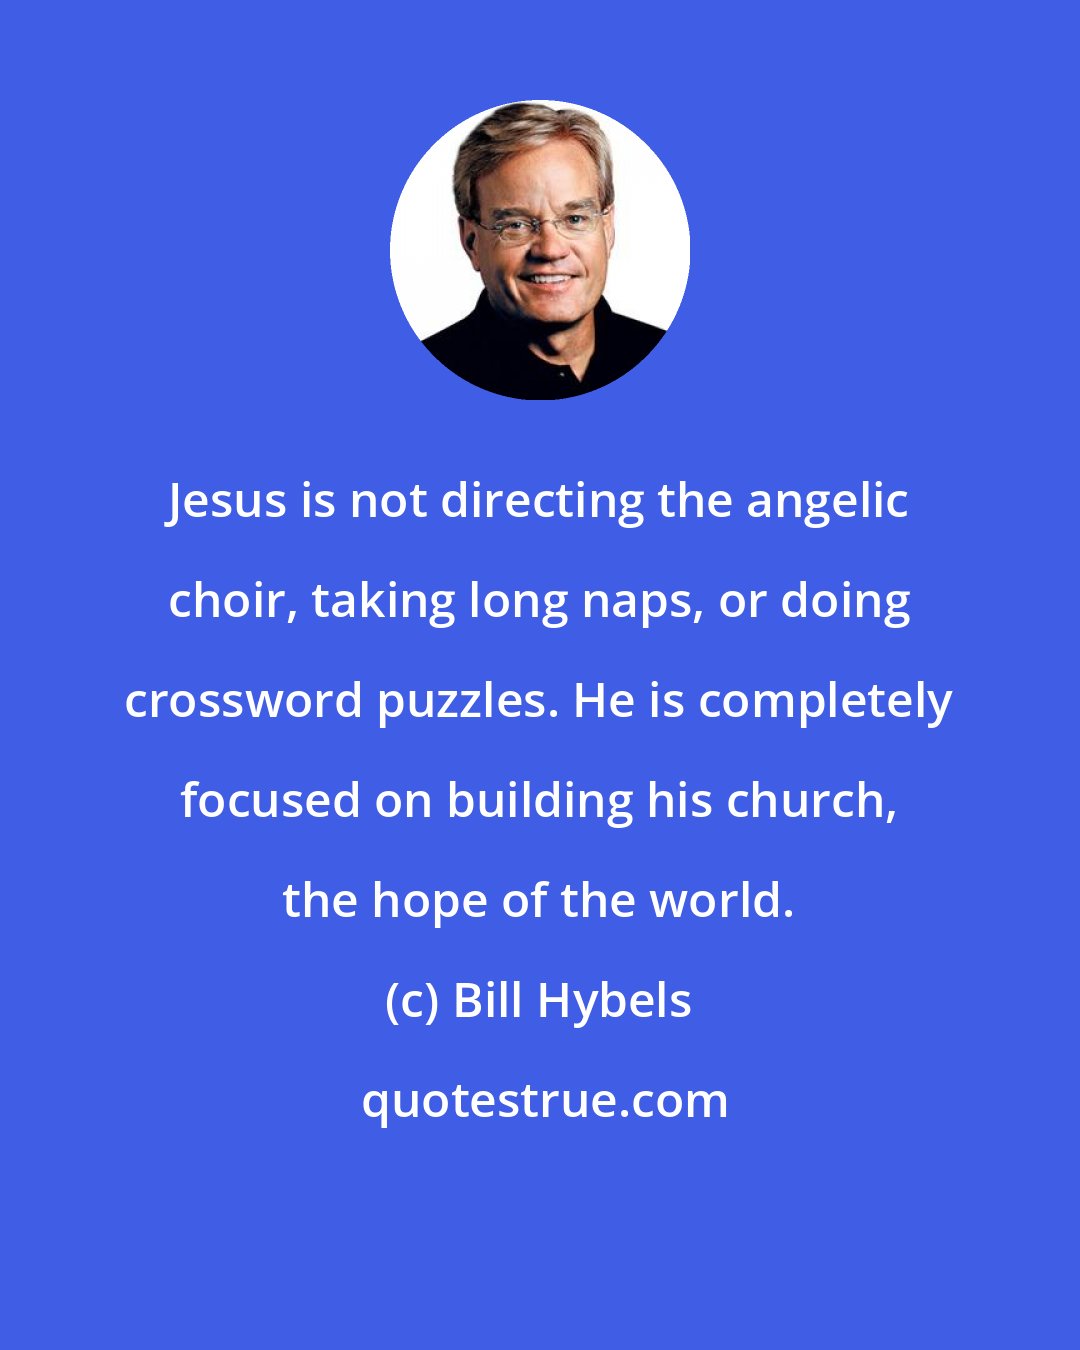 Bill Hybels: Jesus is not directing the angelic choir, taking long naps, or doing crossword puzzles. He is completely focused on building his church, the hope of the world.